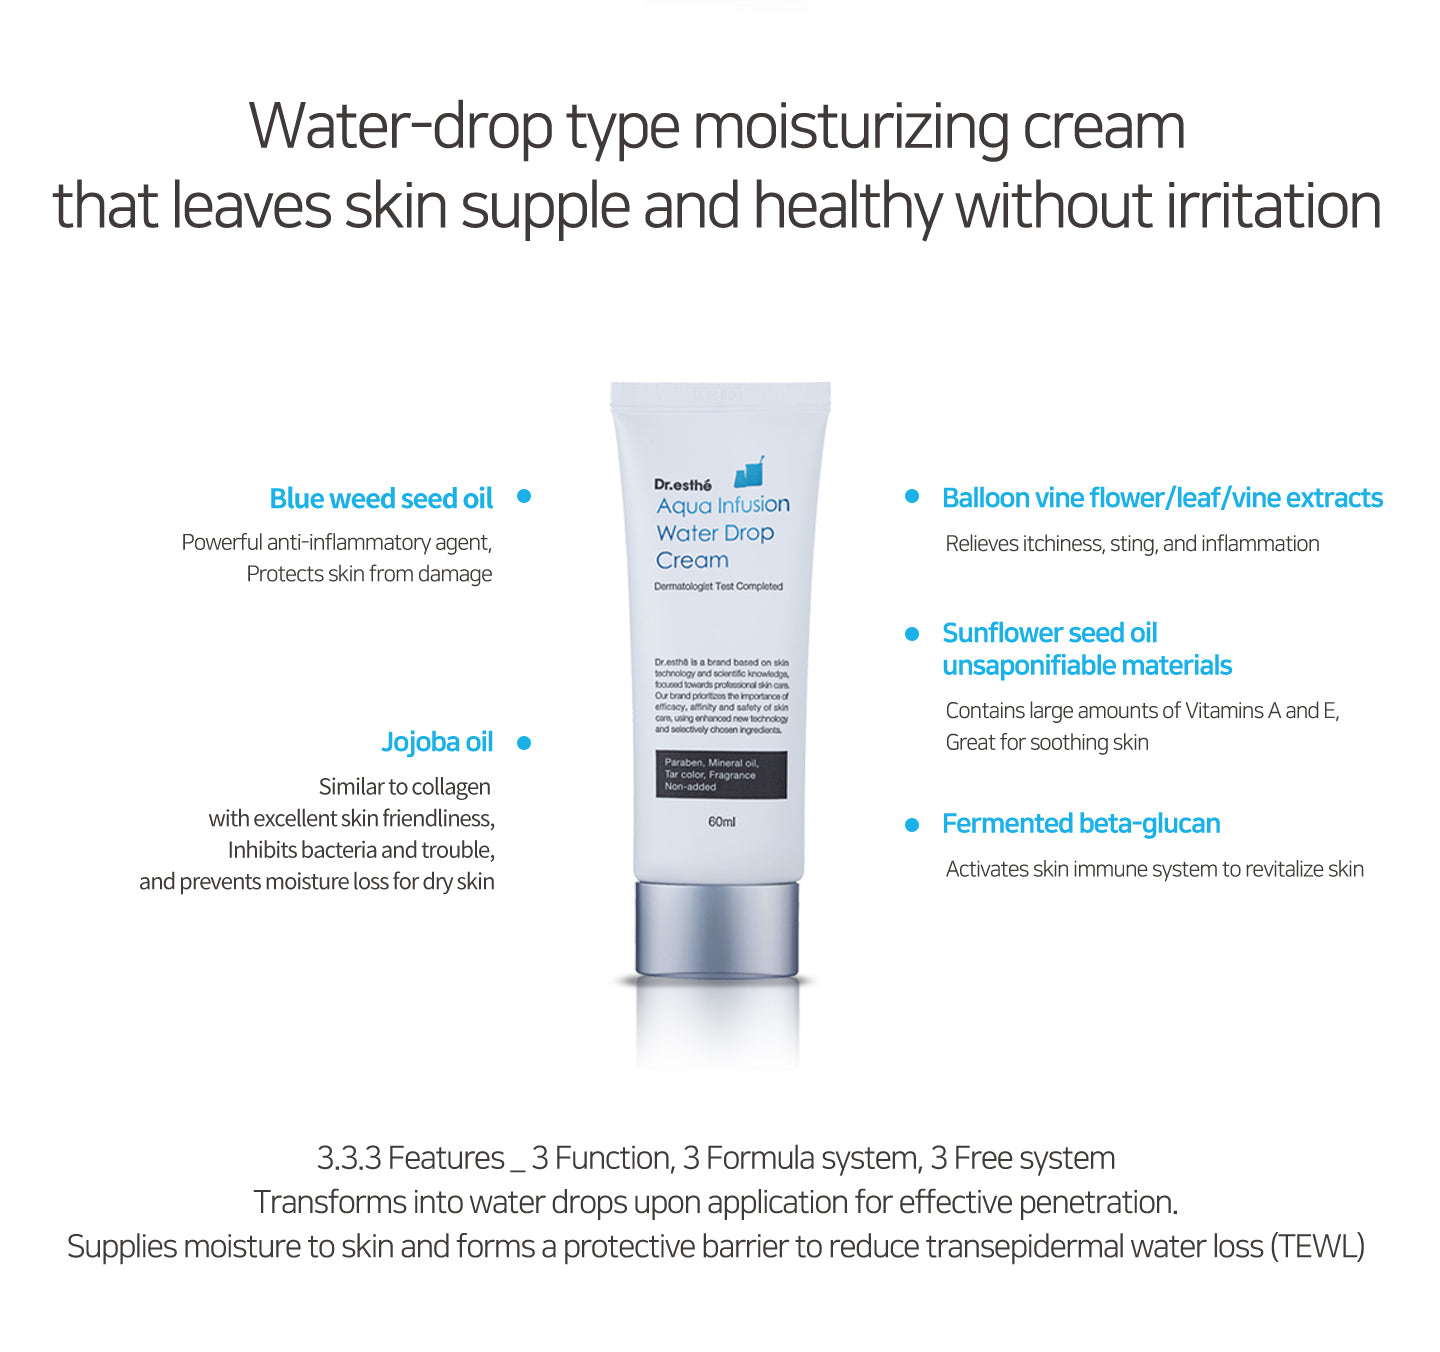 Water-drop type moisturizing cream that leaves skin supple and healthy without irritation. Blue weed seed oil, jojoba oil, balloon vine flower/ leaf/vine extracts, sunflower seed oil non-saponifiable materials, fermented beta-glucan.  